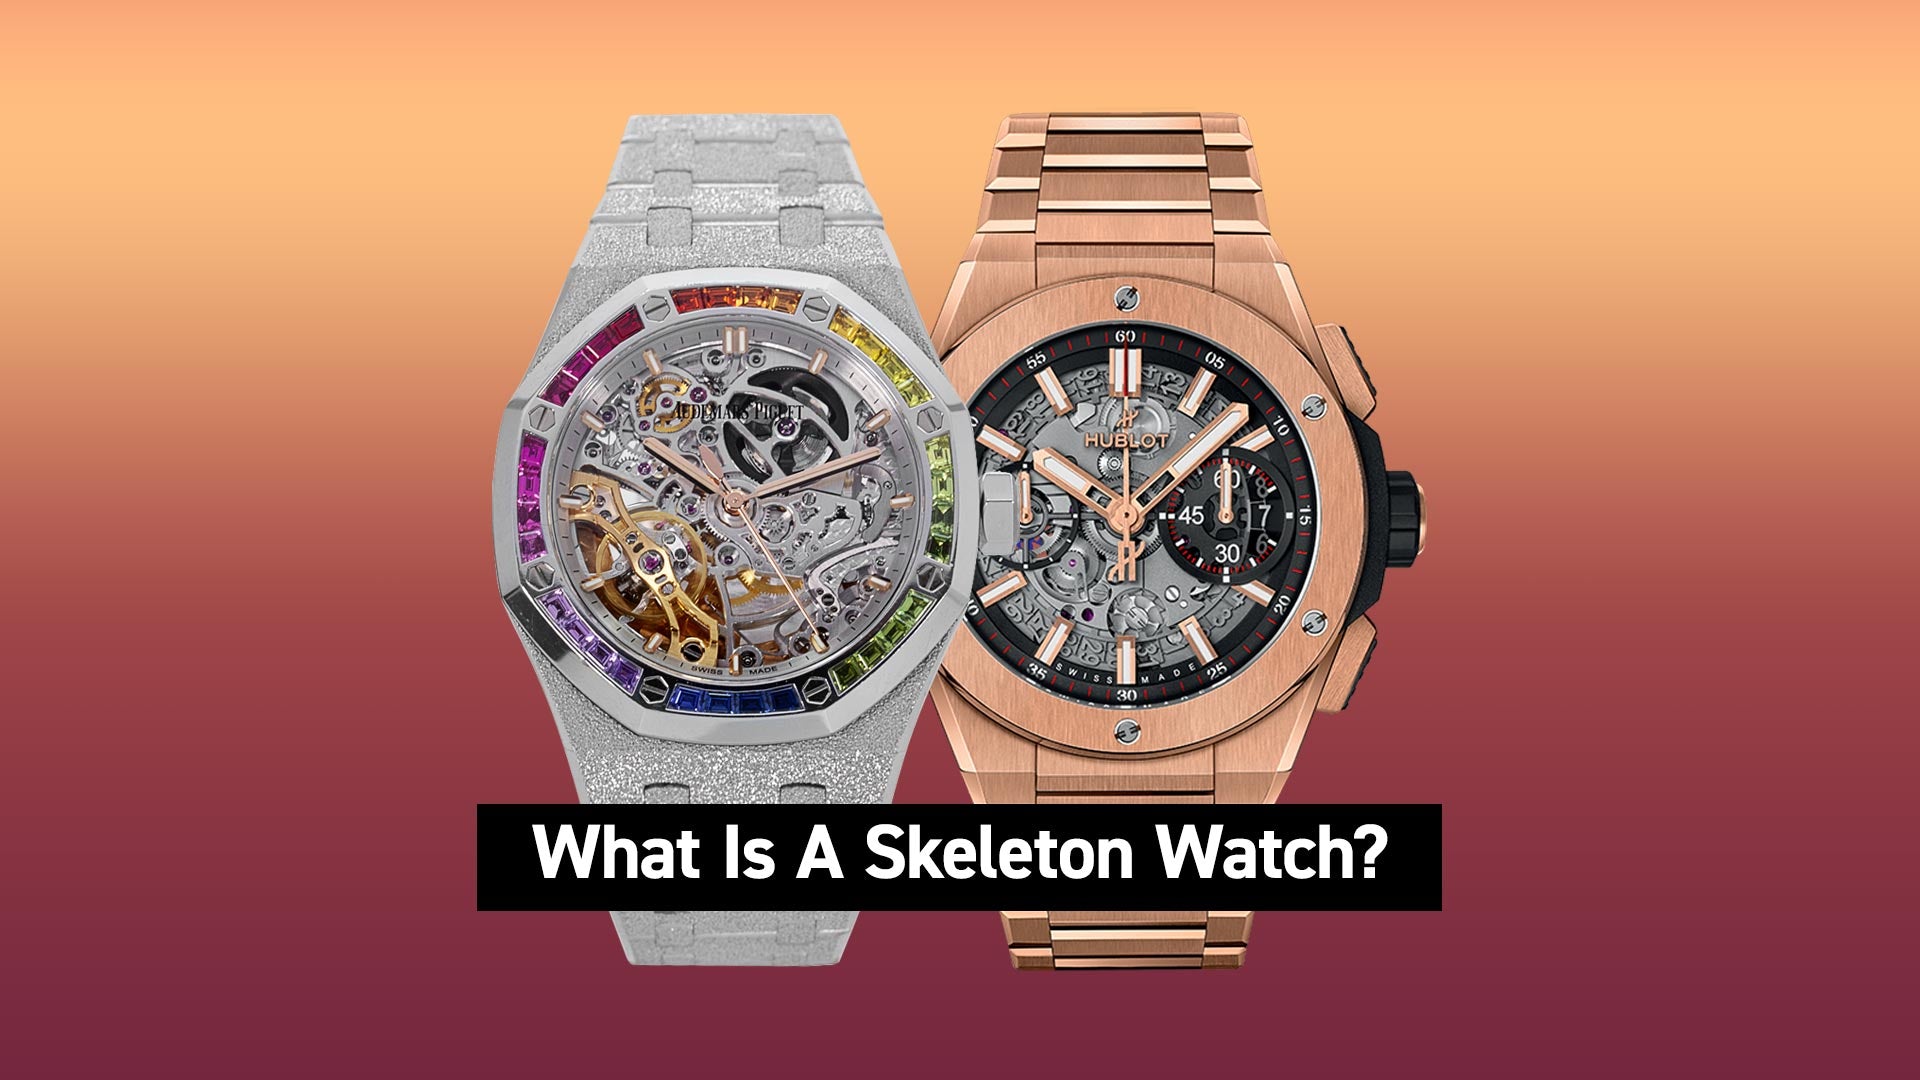 What Is A 'Skeleton' Watch?